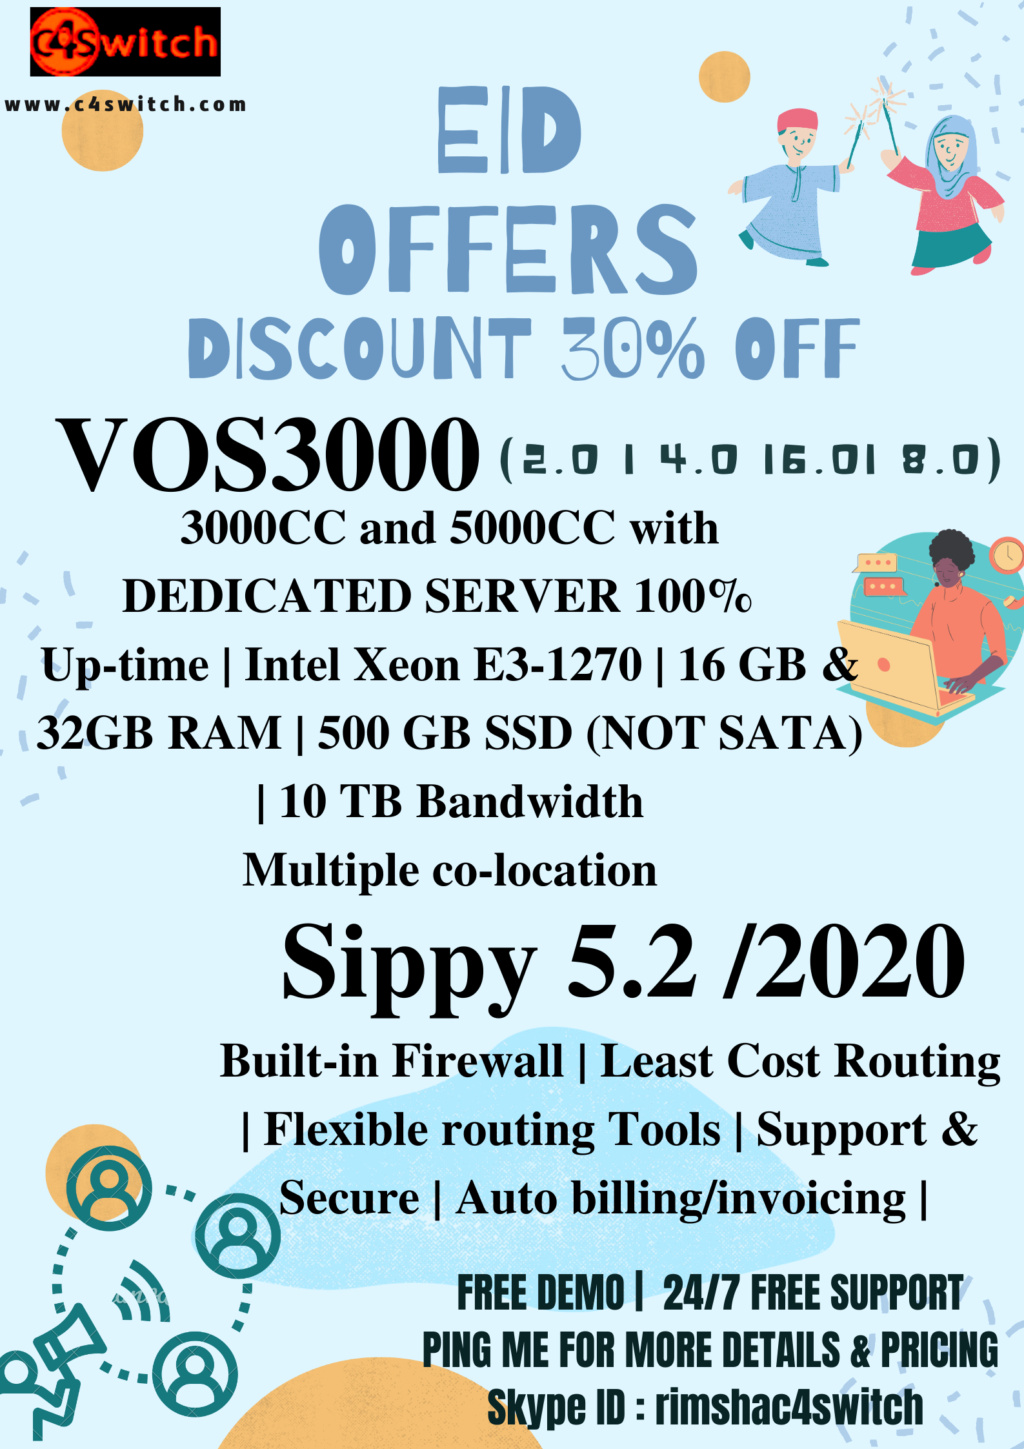  Reply New Topic EID OFFERS DISCOUNTS 30%OFF VOS3000 & SIPPY.. Eidd10